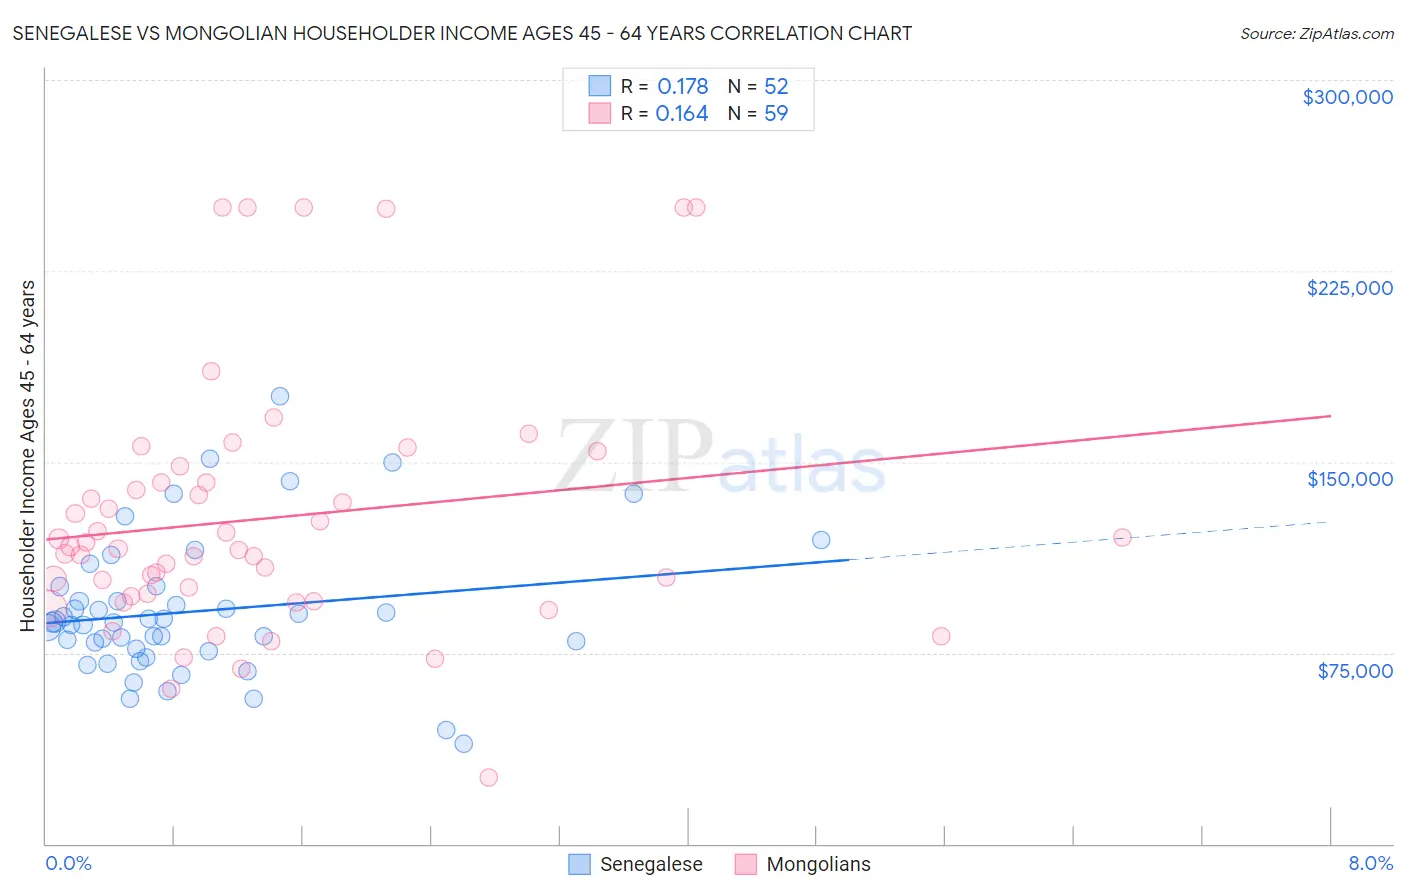 Senegalese vs Mongolian Householder Income Ages 45 - 64 years